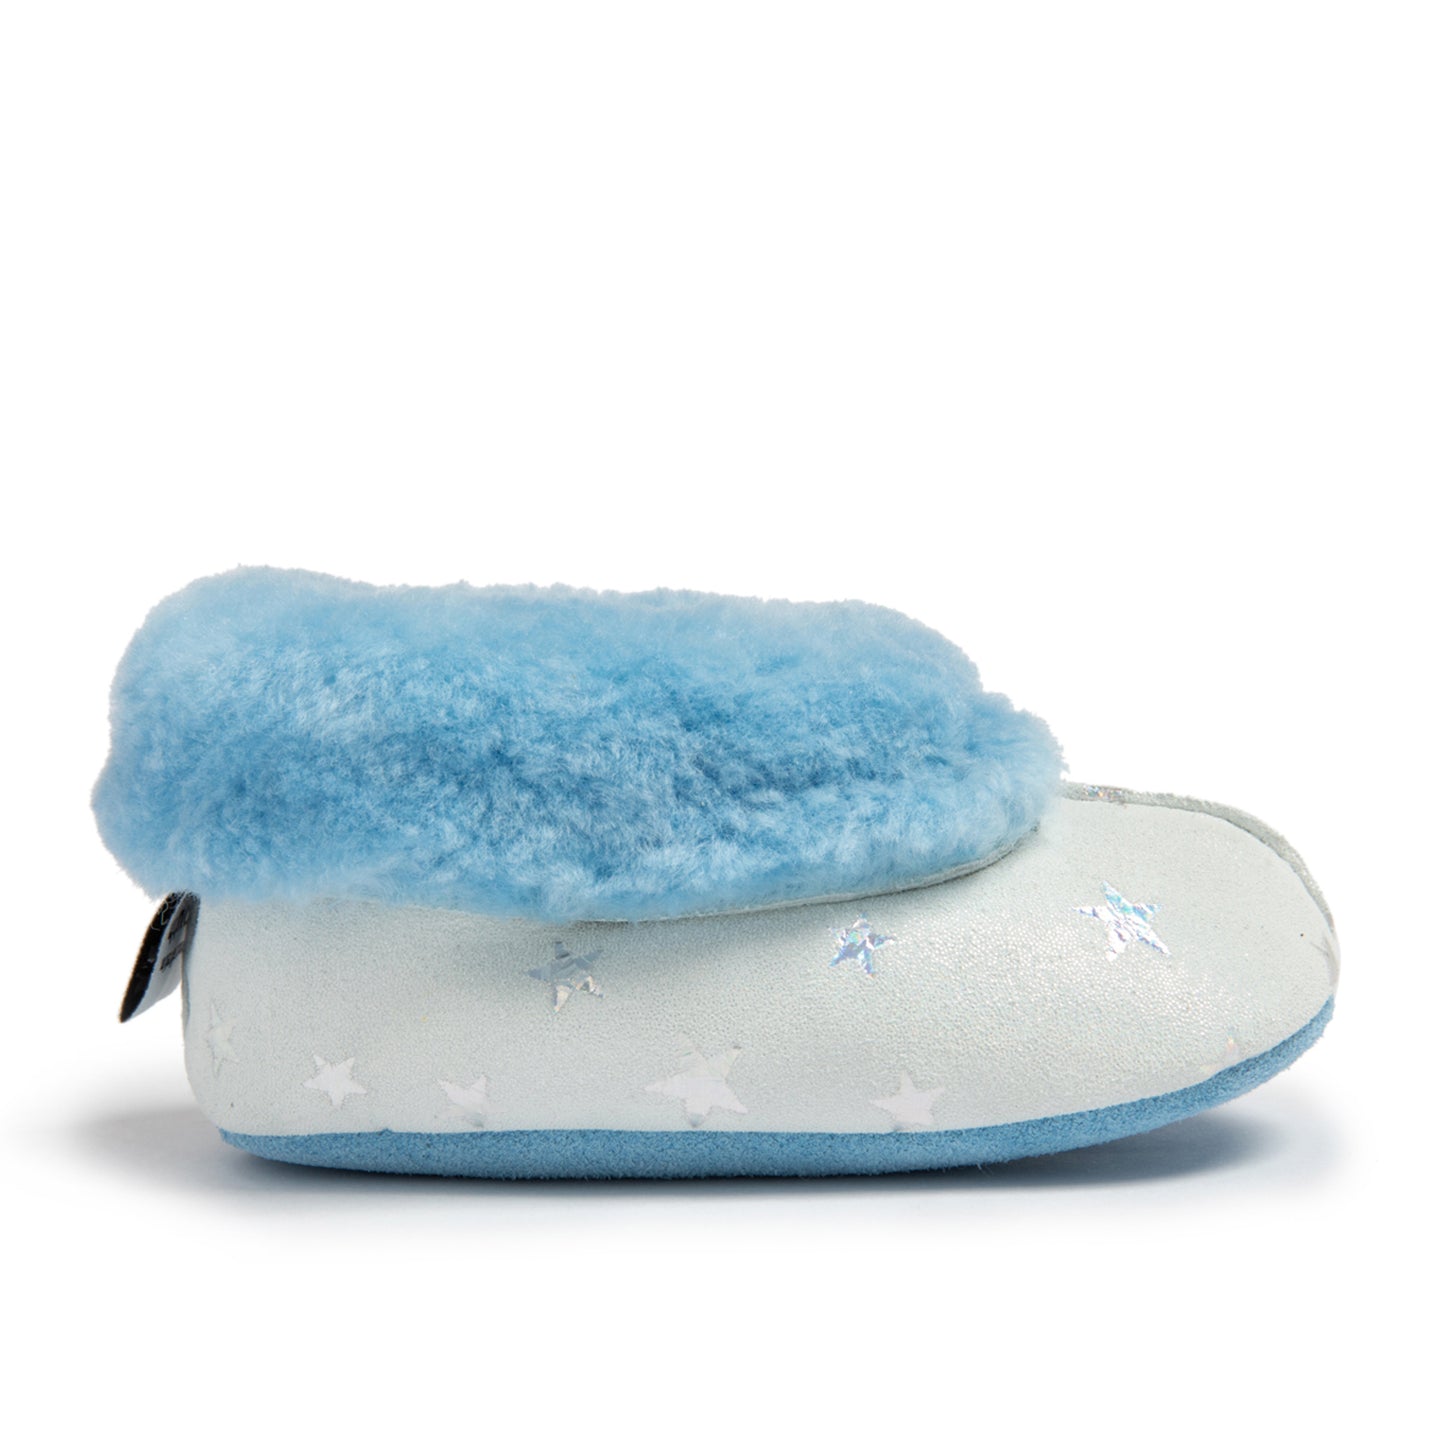 CLYDE Soft Sole Slippers Grey & Blue (side view) - Shop Online | shooshoos.co.za